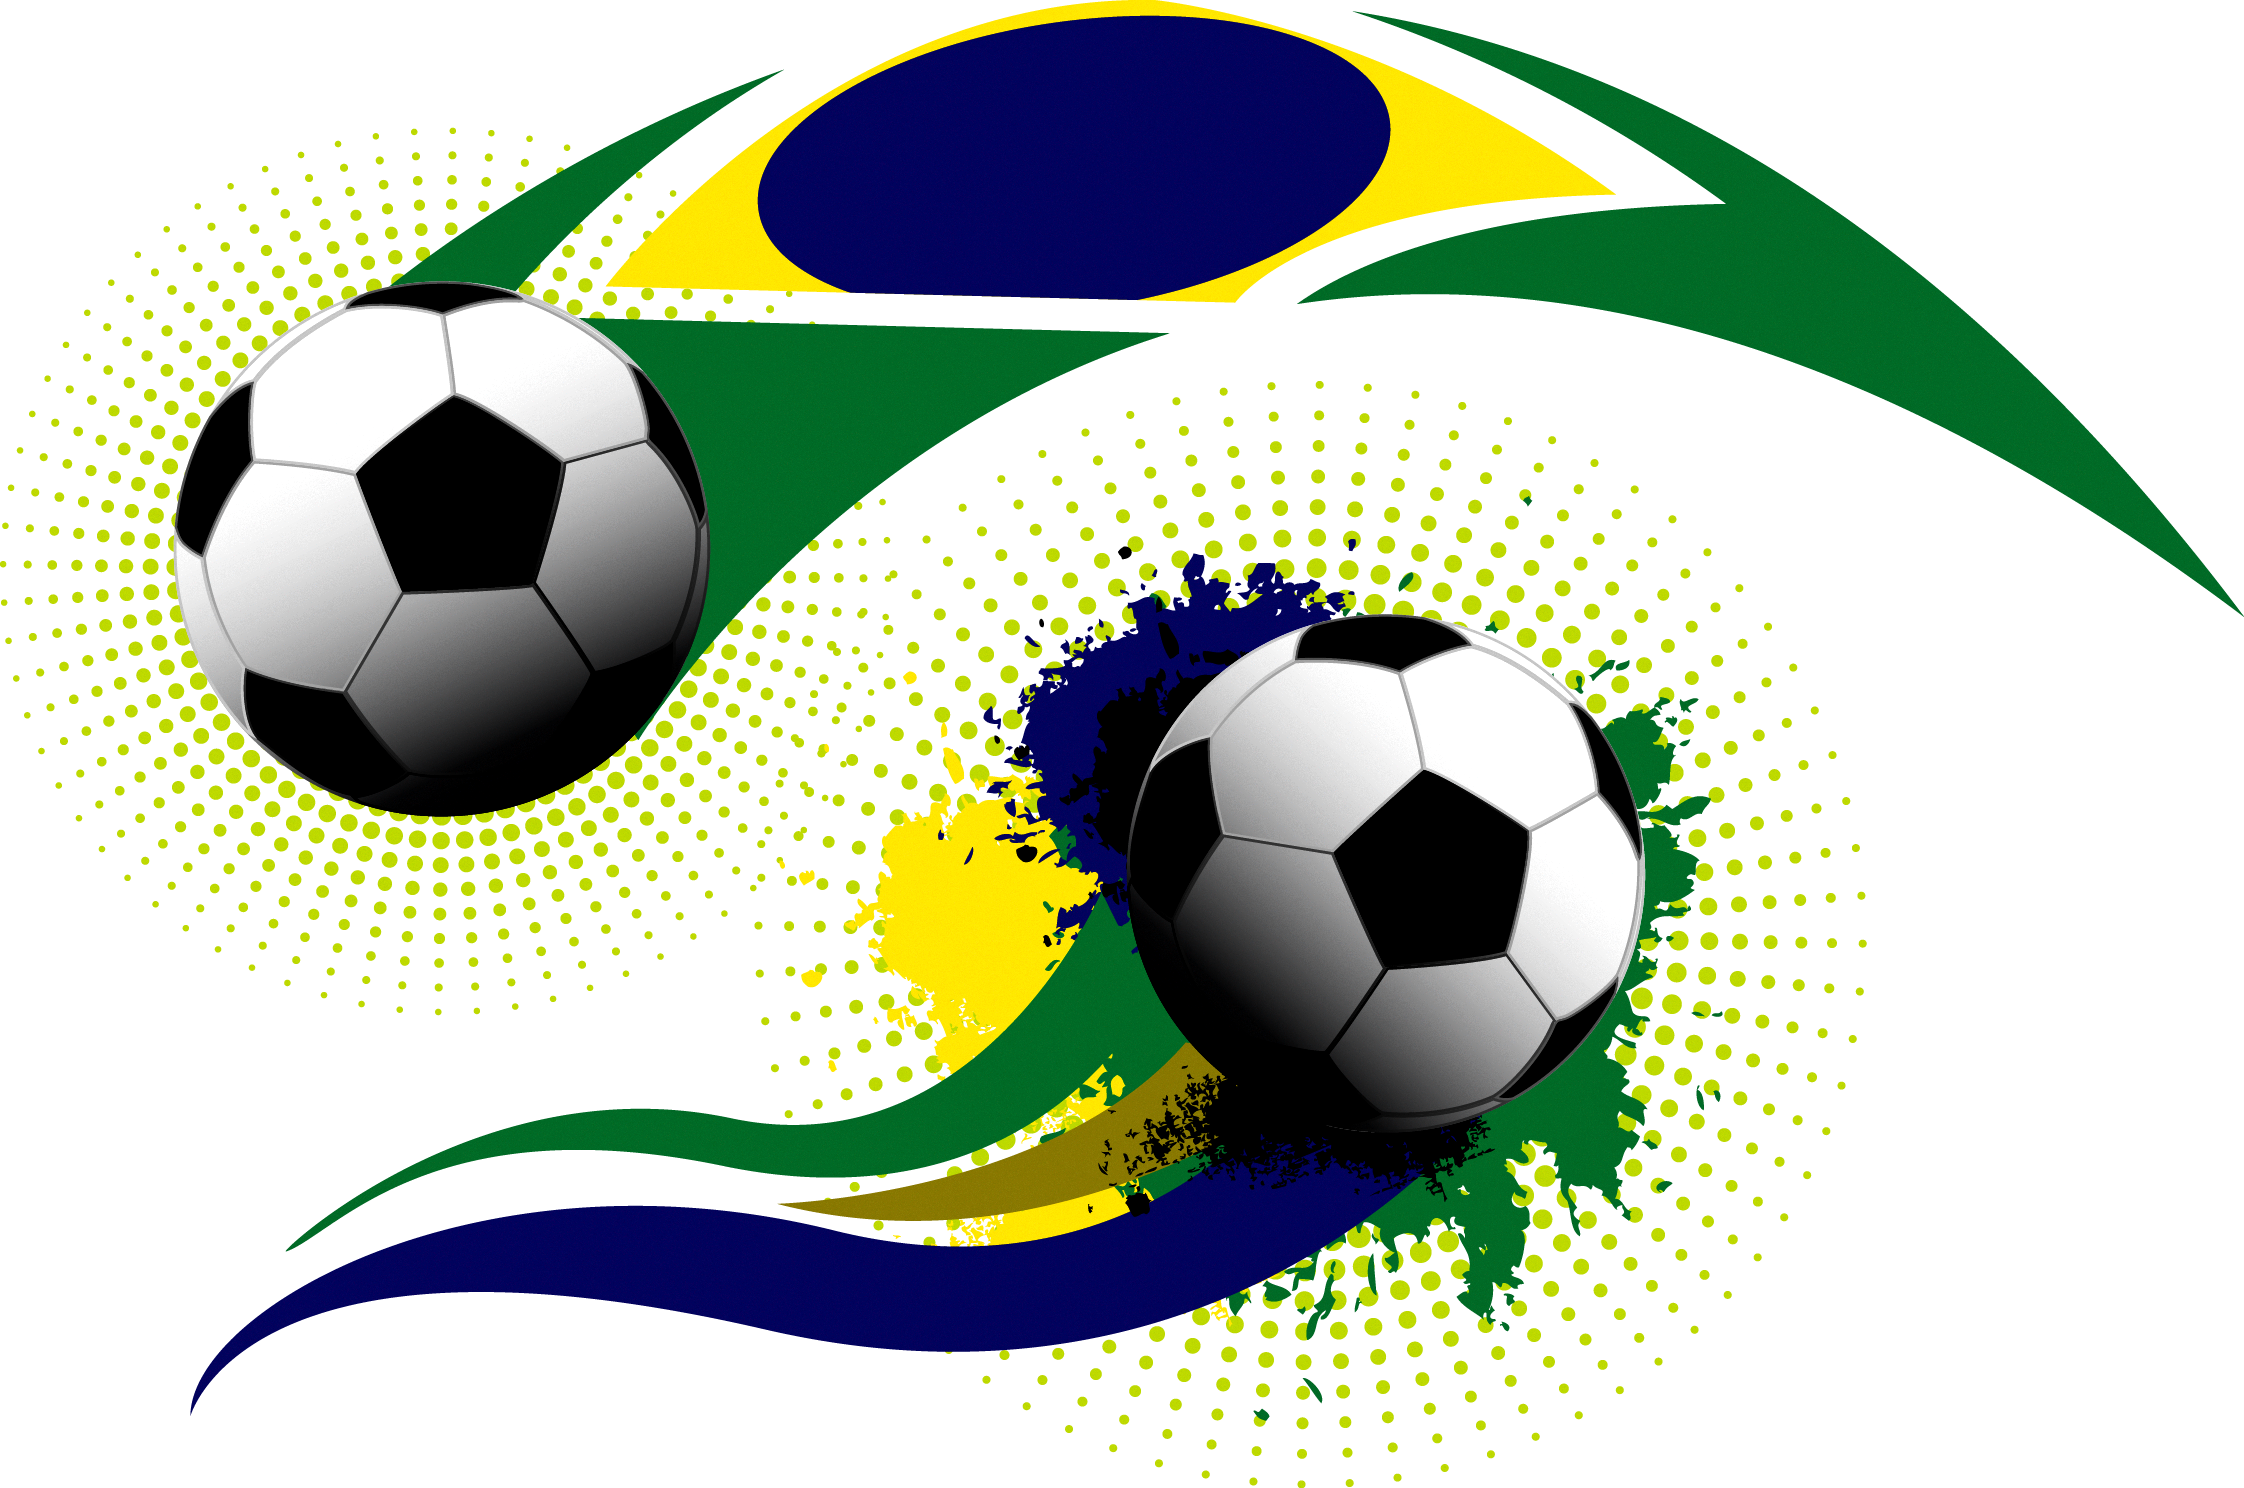 Clipart football score clipart images gallery for free.